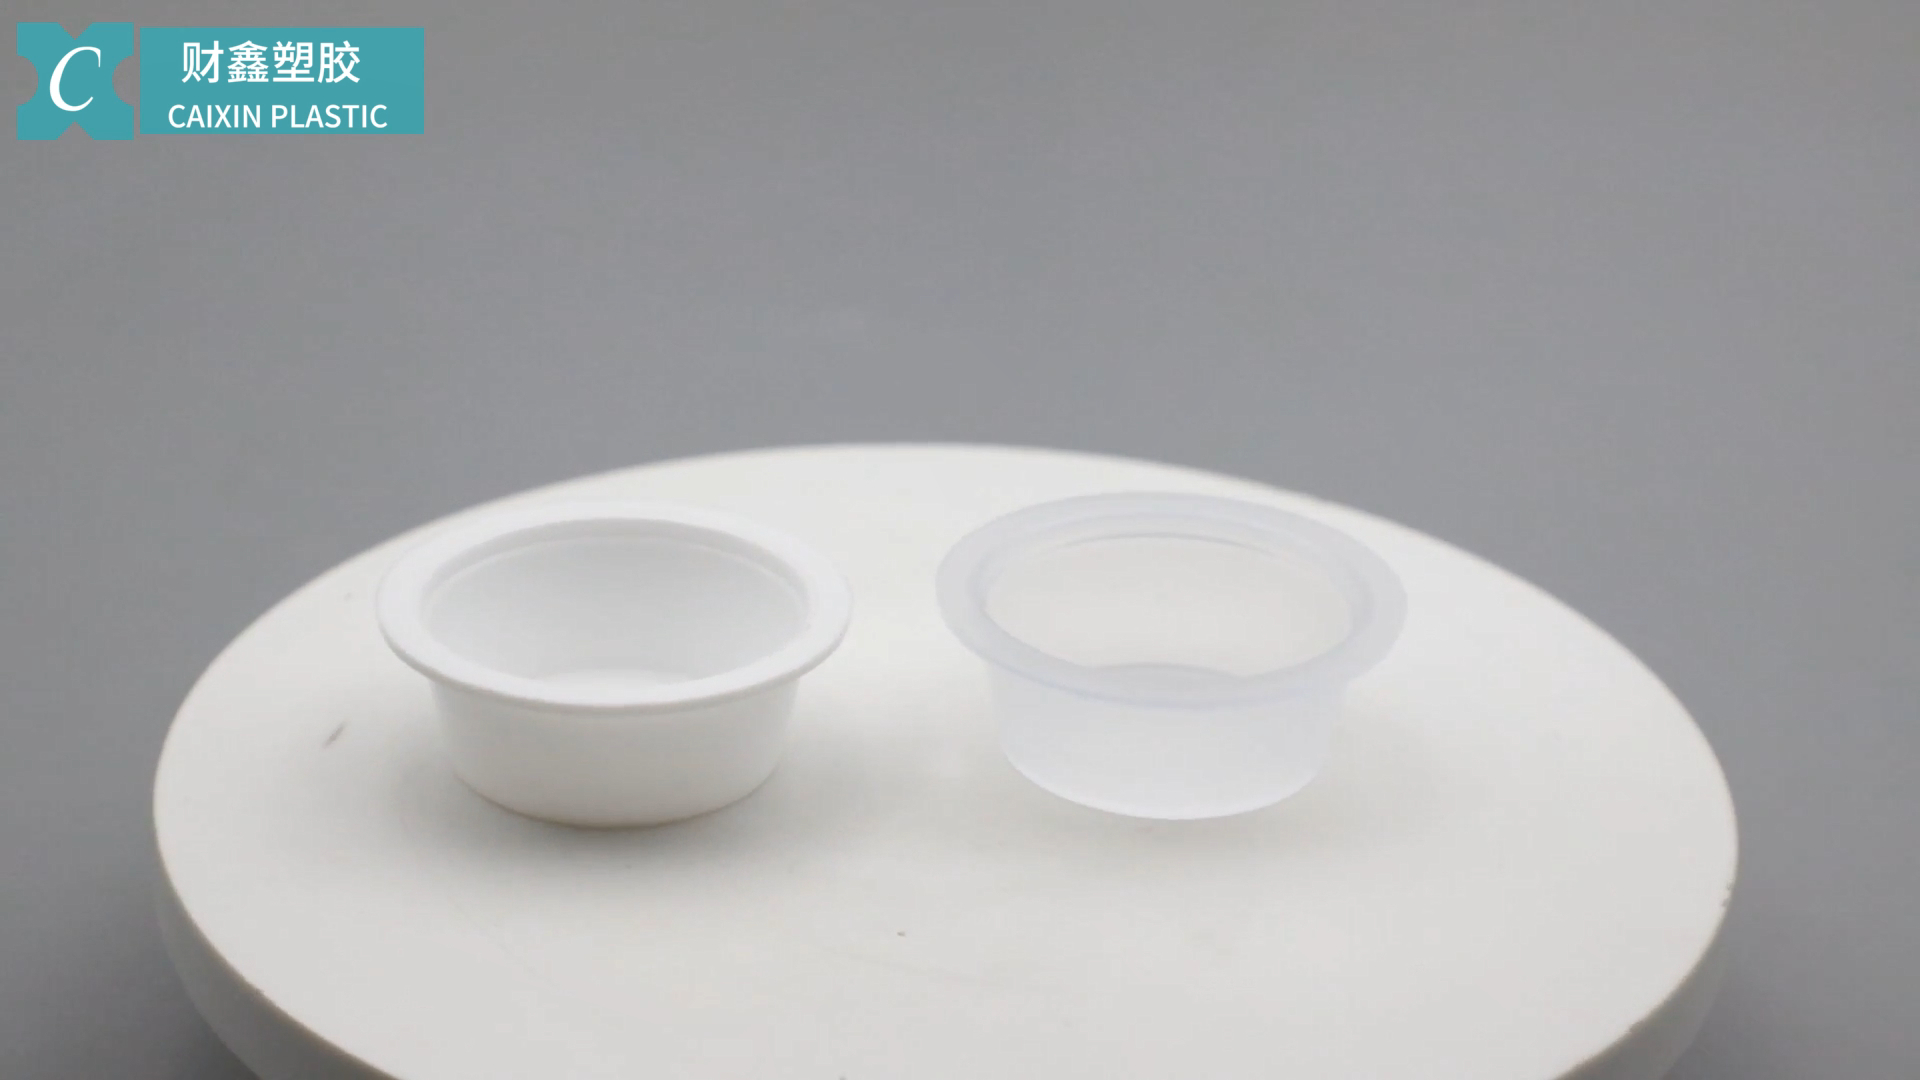  Best Customized plastic container manufacturers 30g sauce cups CX111A Company - Caixin Plastic 